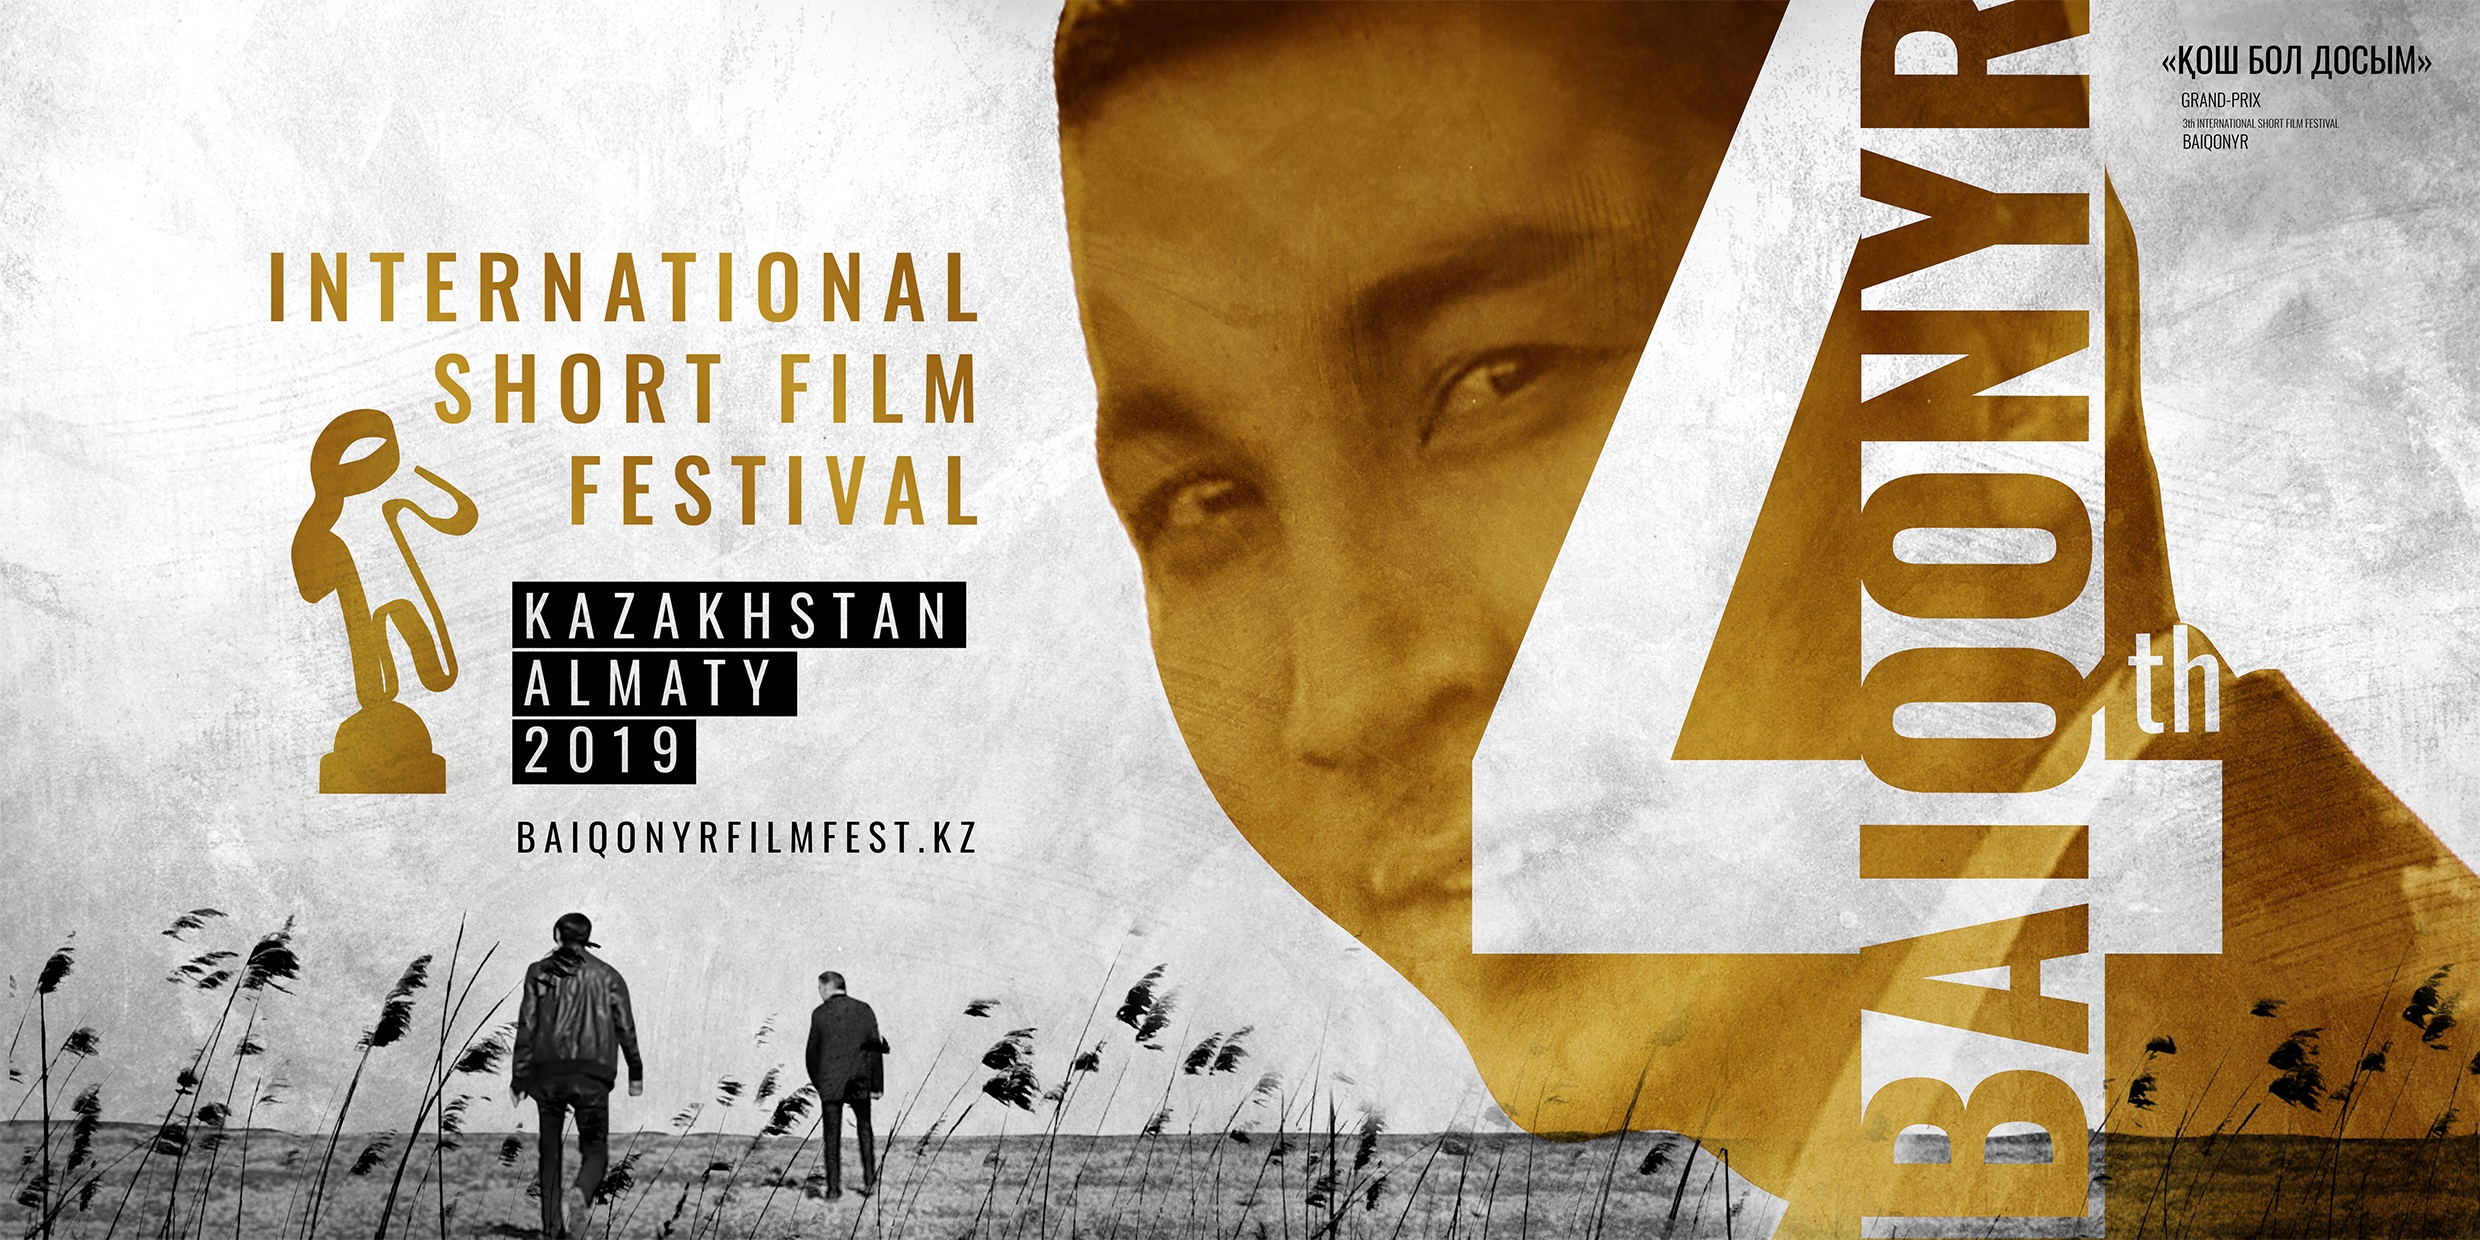 The official poster of the IV Baiqonyr International Short Film Festival is presented